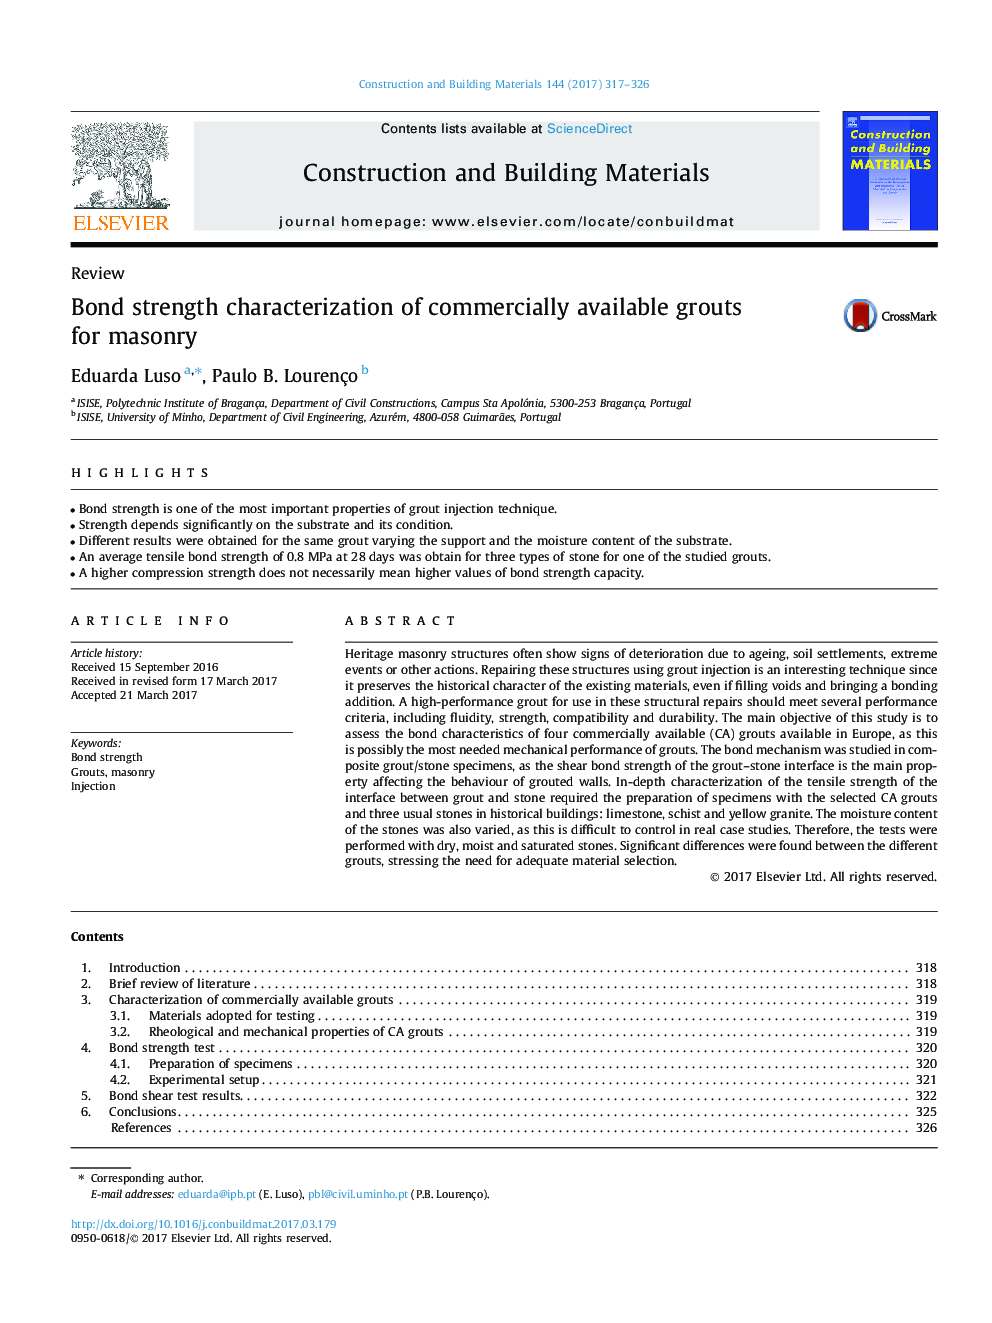 Bond strength characterization of commercially available grouts for masonry